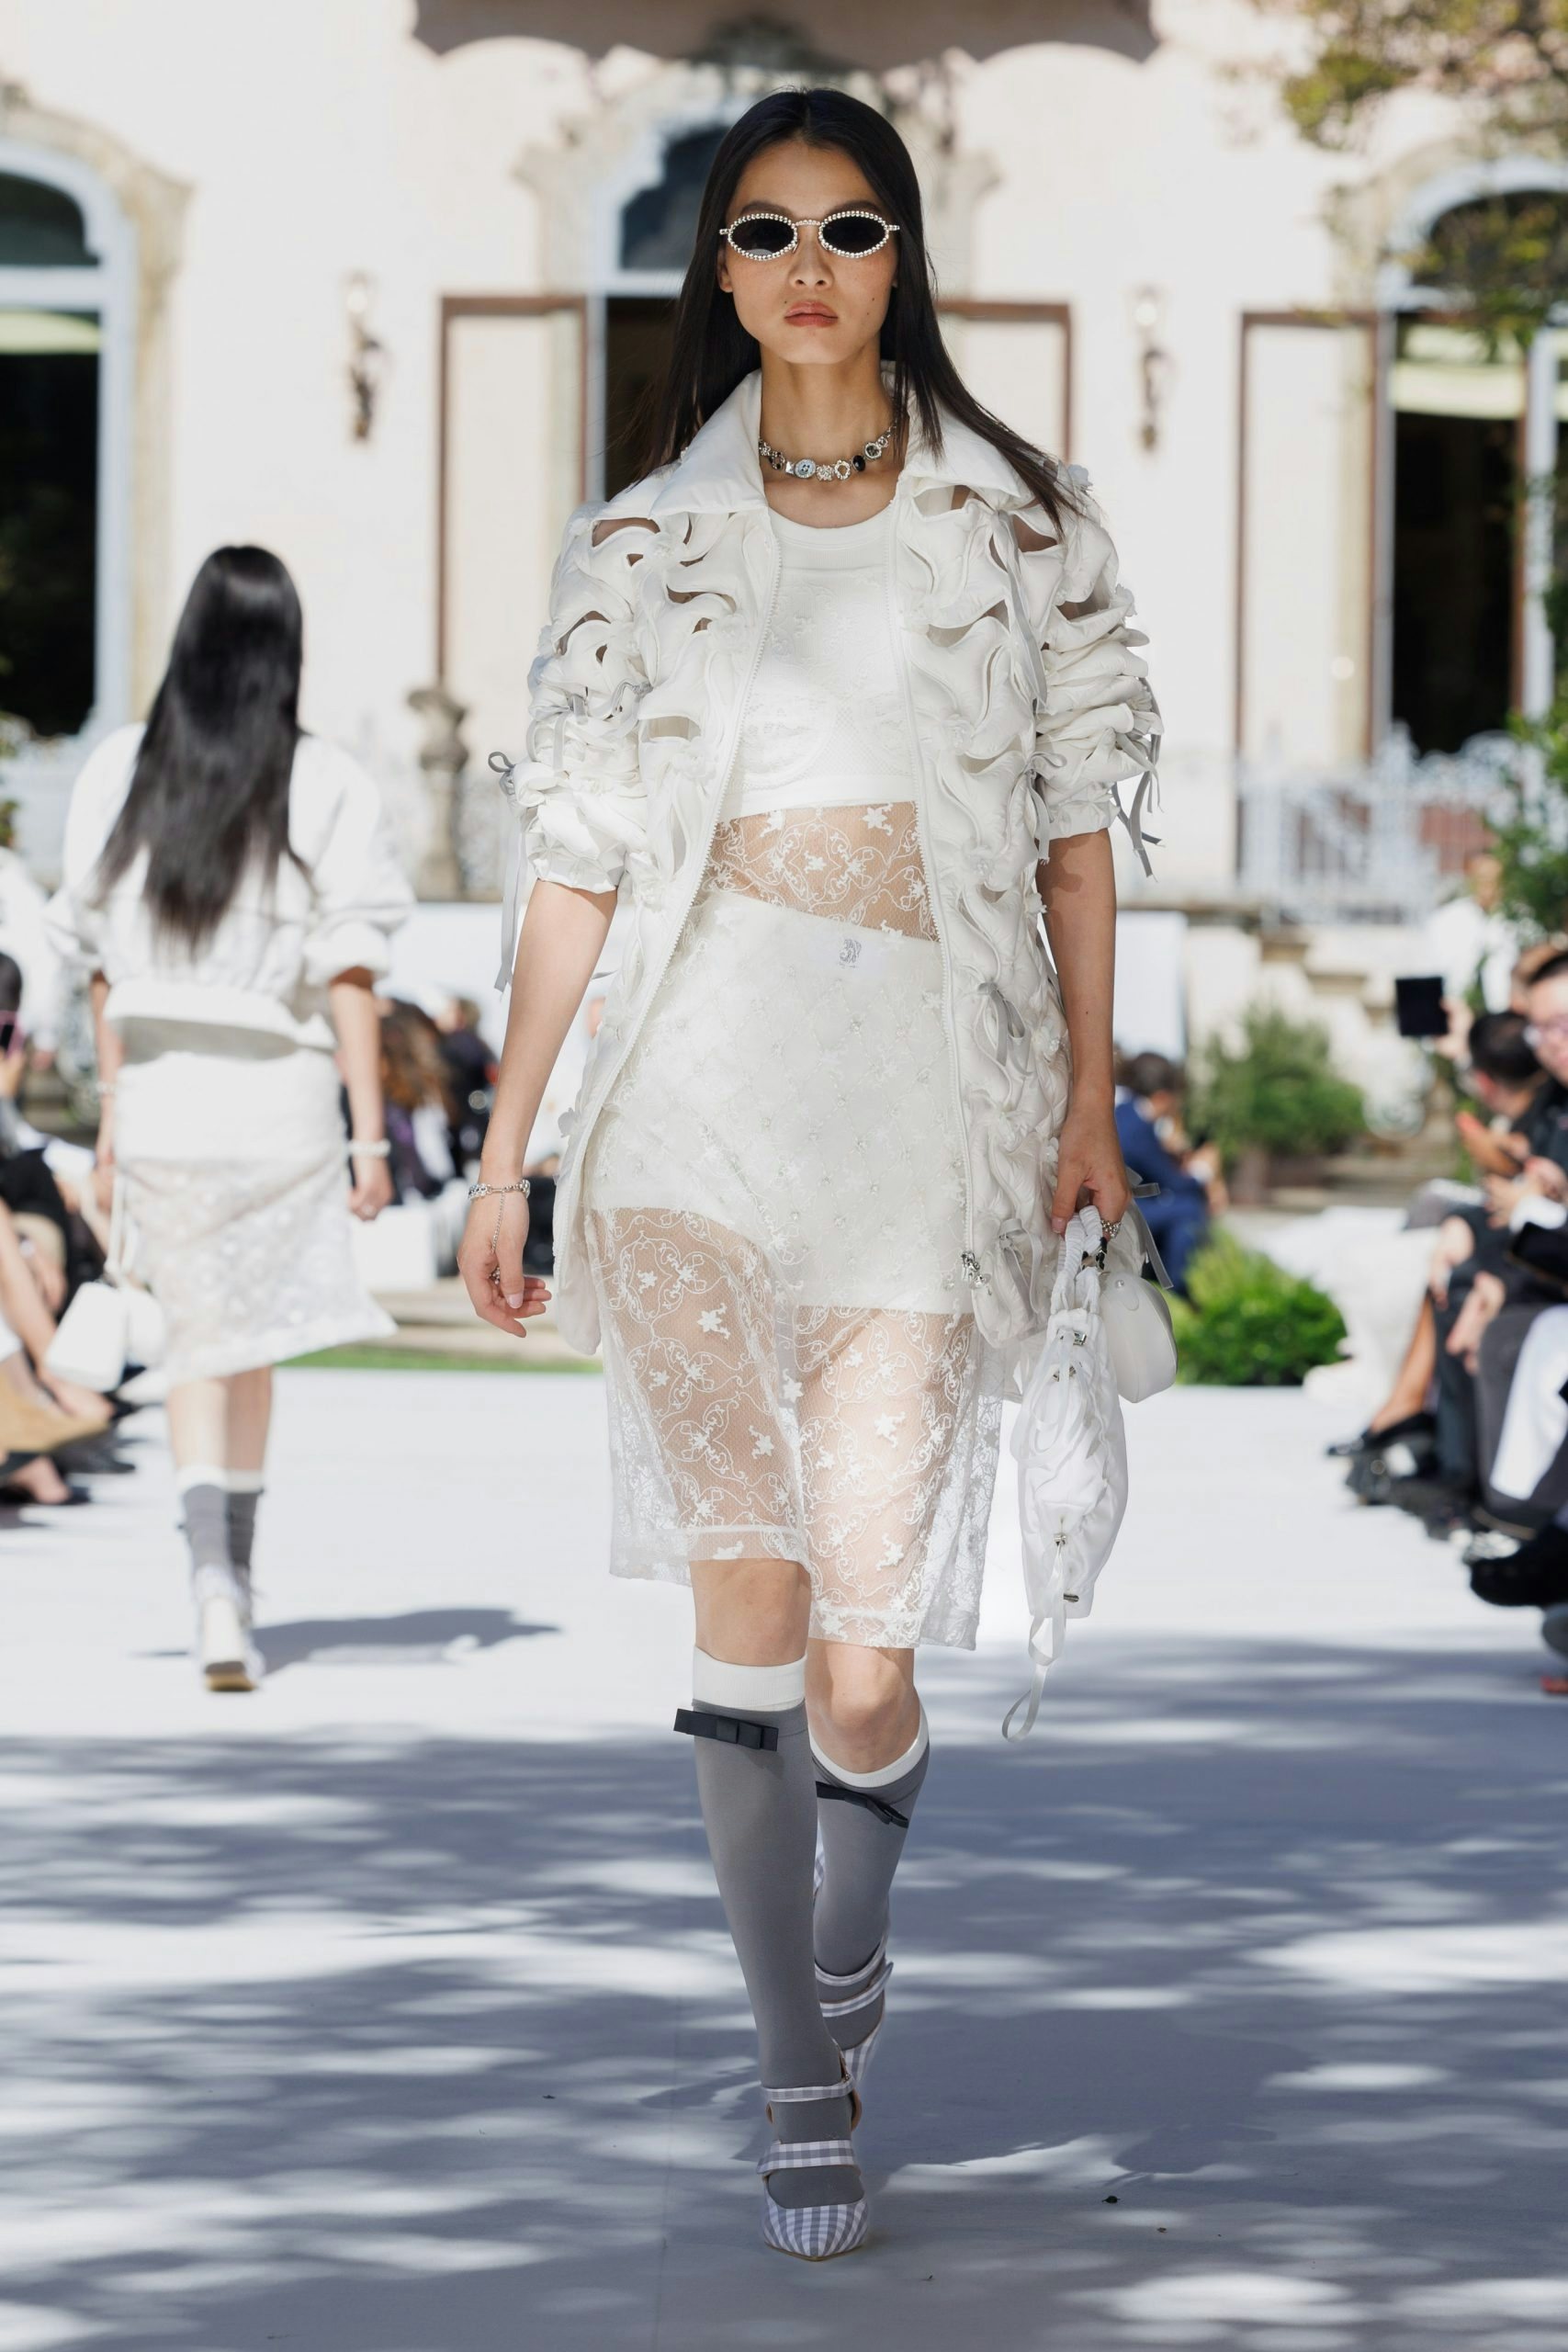 To elevate the Spring 2024 collection, Bosideng has worked with an Italian sunglasses brand, also connecting to local culture at Milan Fashion Week. Photo: Bosideng